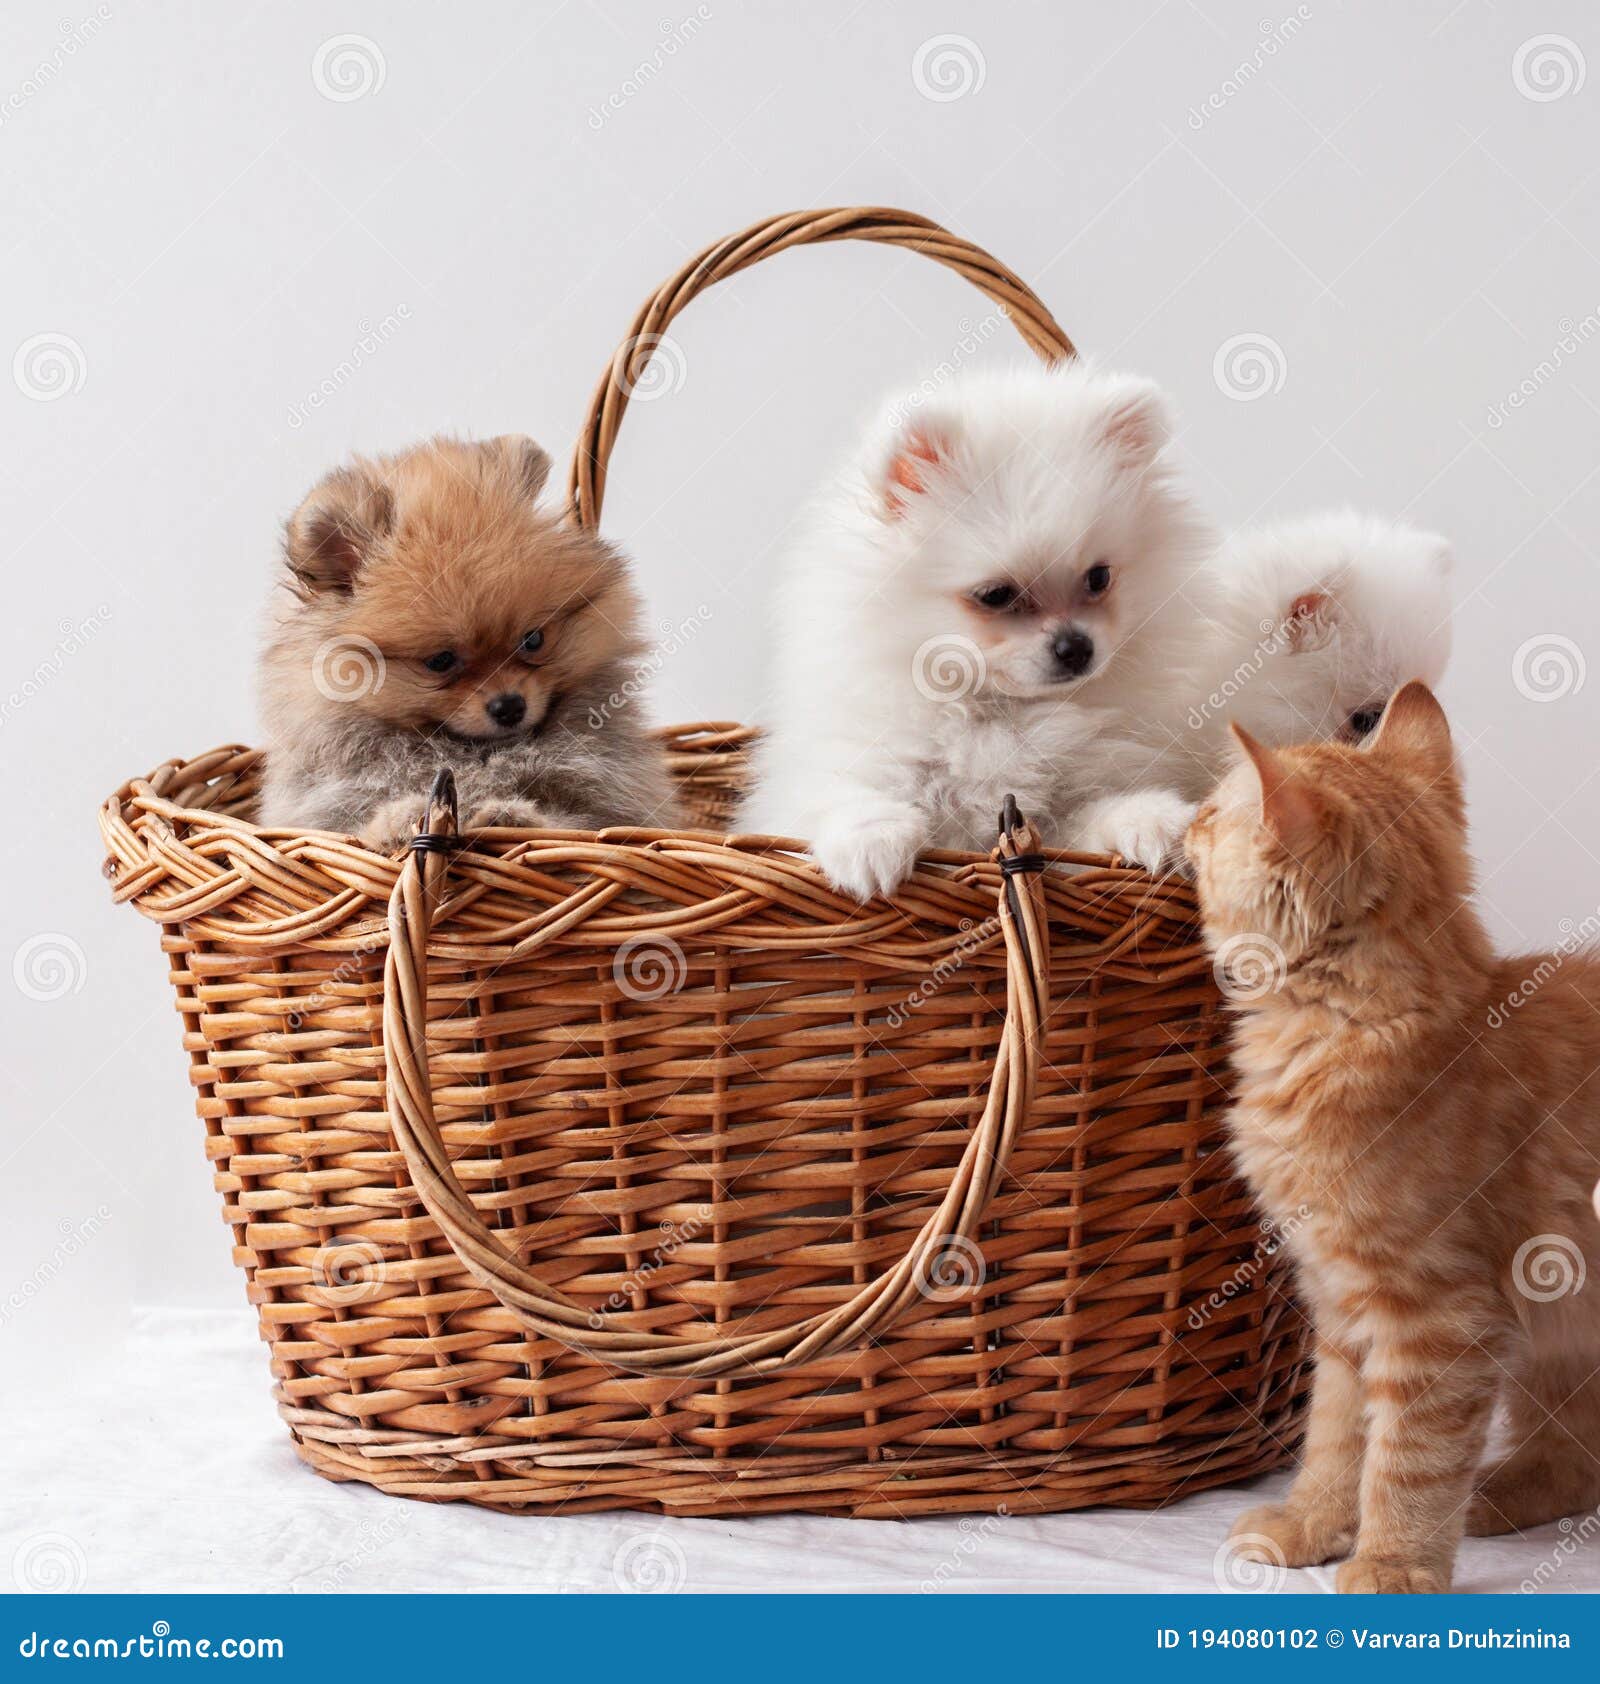 three fluffy pomeranian puppies two white and one sable color sit in a basket next to a red tabby kitten and looks at the puppies